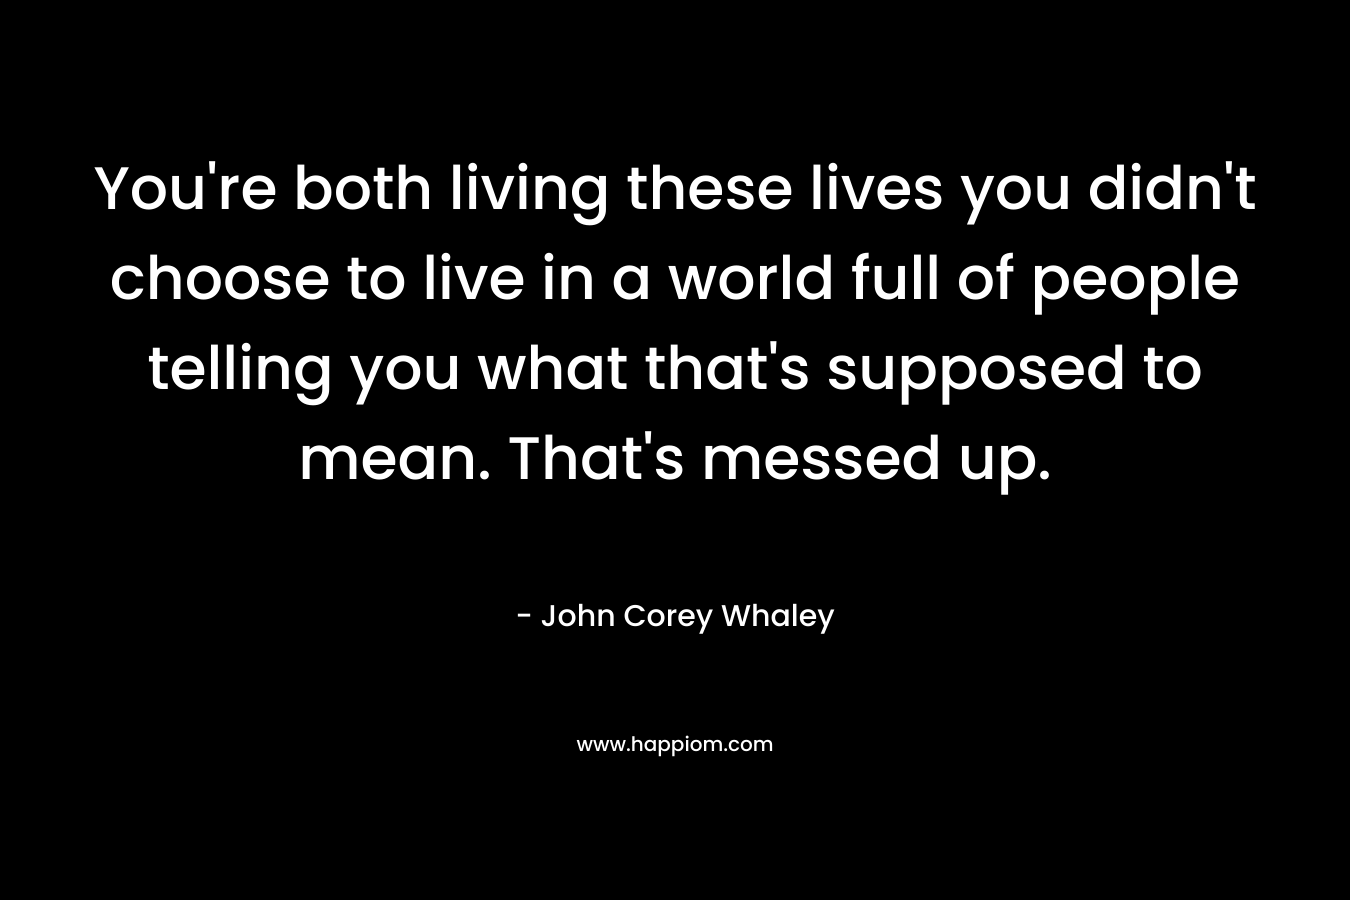 You’re both living these lives you didn’t choose to live in a world full of people telling you what that’s supposed to mean. That’s messed up. – John Corey Whaley